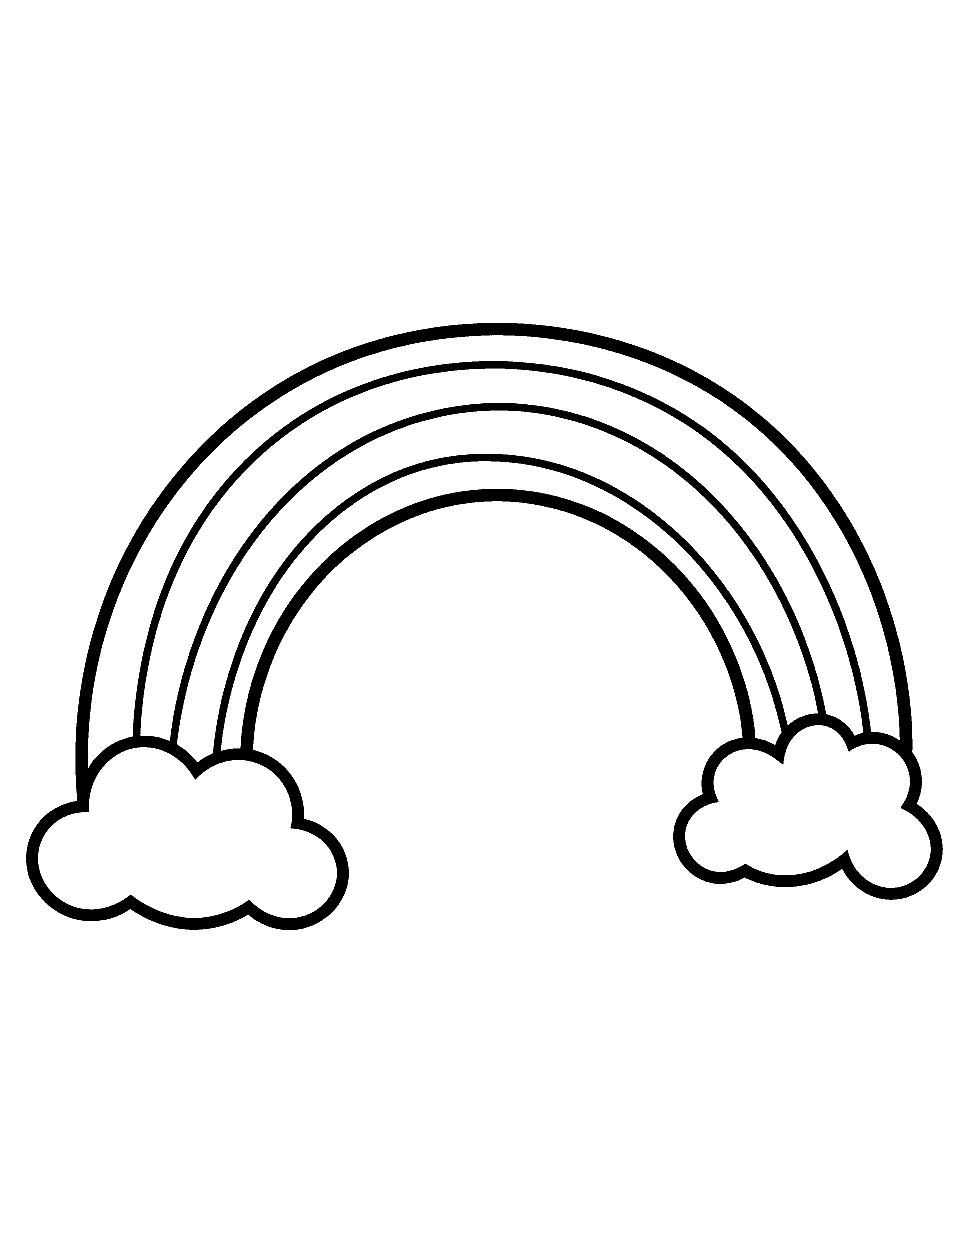 Rainbow for Toddlers Coloring Page - A simple, broad-stroked rainbow for toddler hands to color.